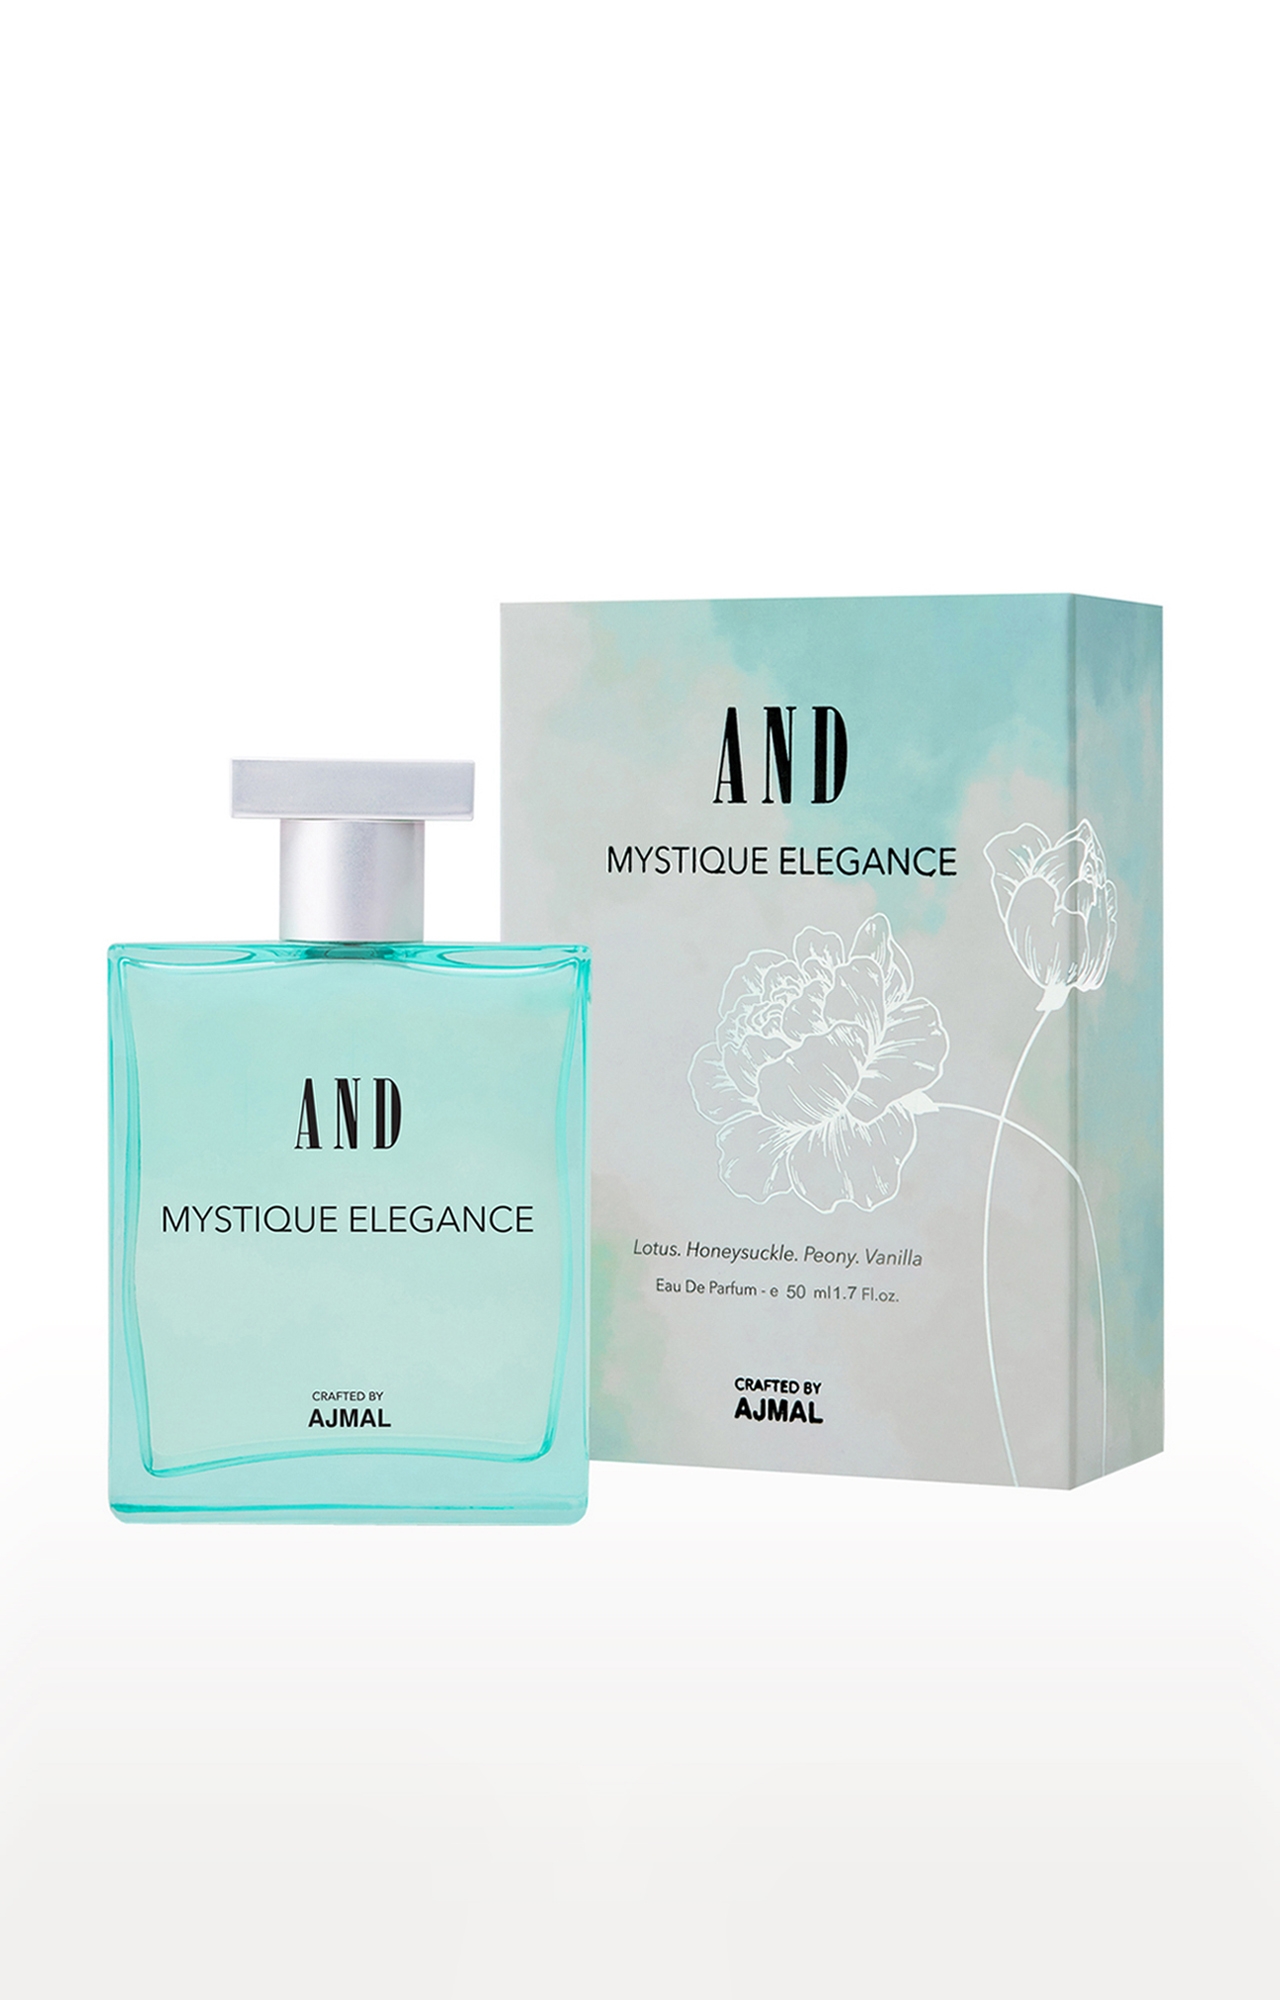 And Mystique Elegance Eau De Parfum 50ML Long Lasting Scent Spray Gift For Women Crafted By Ajmal